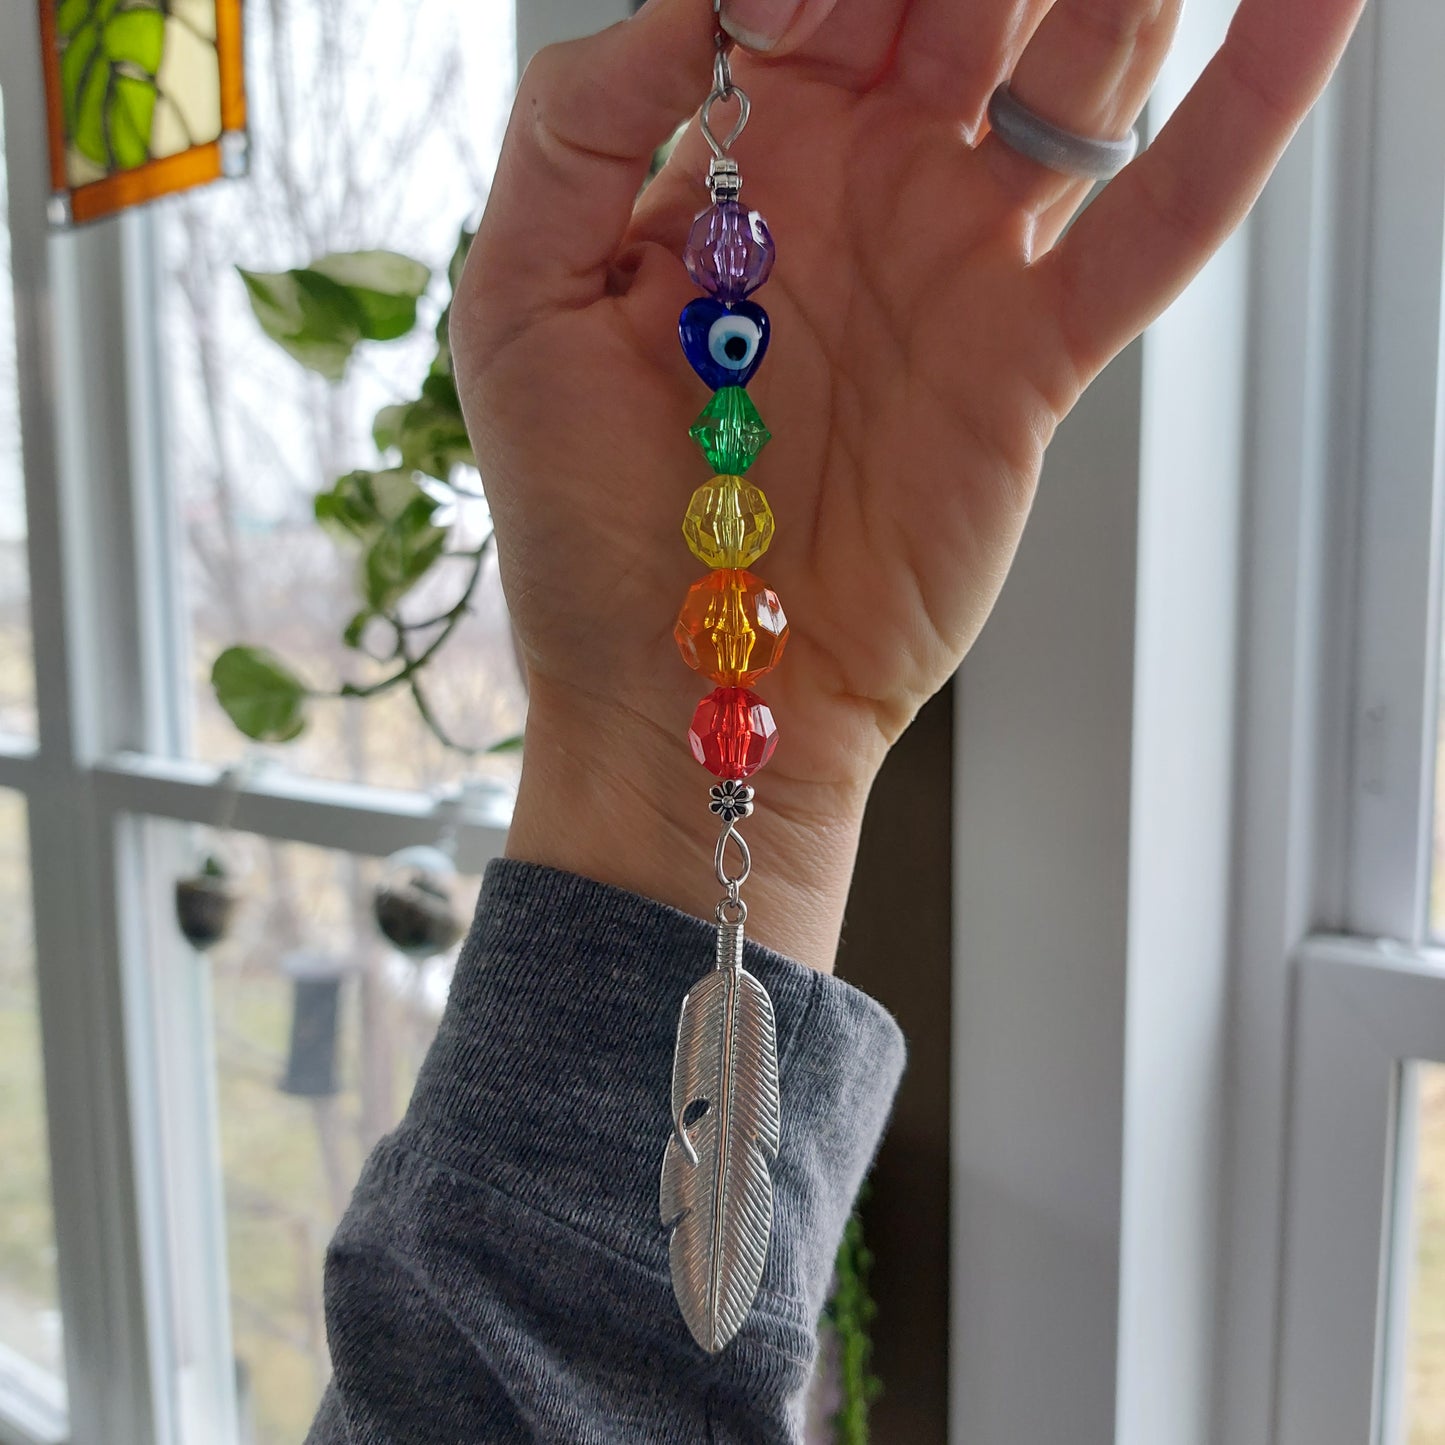 Rainbow flower pot bling with evil eye and feather charm | window hanging, wall decor, car charm, fan/light pull, ornament- whatever you want it to be!